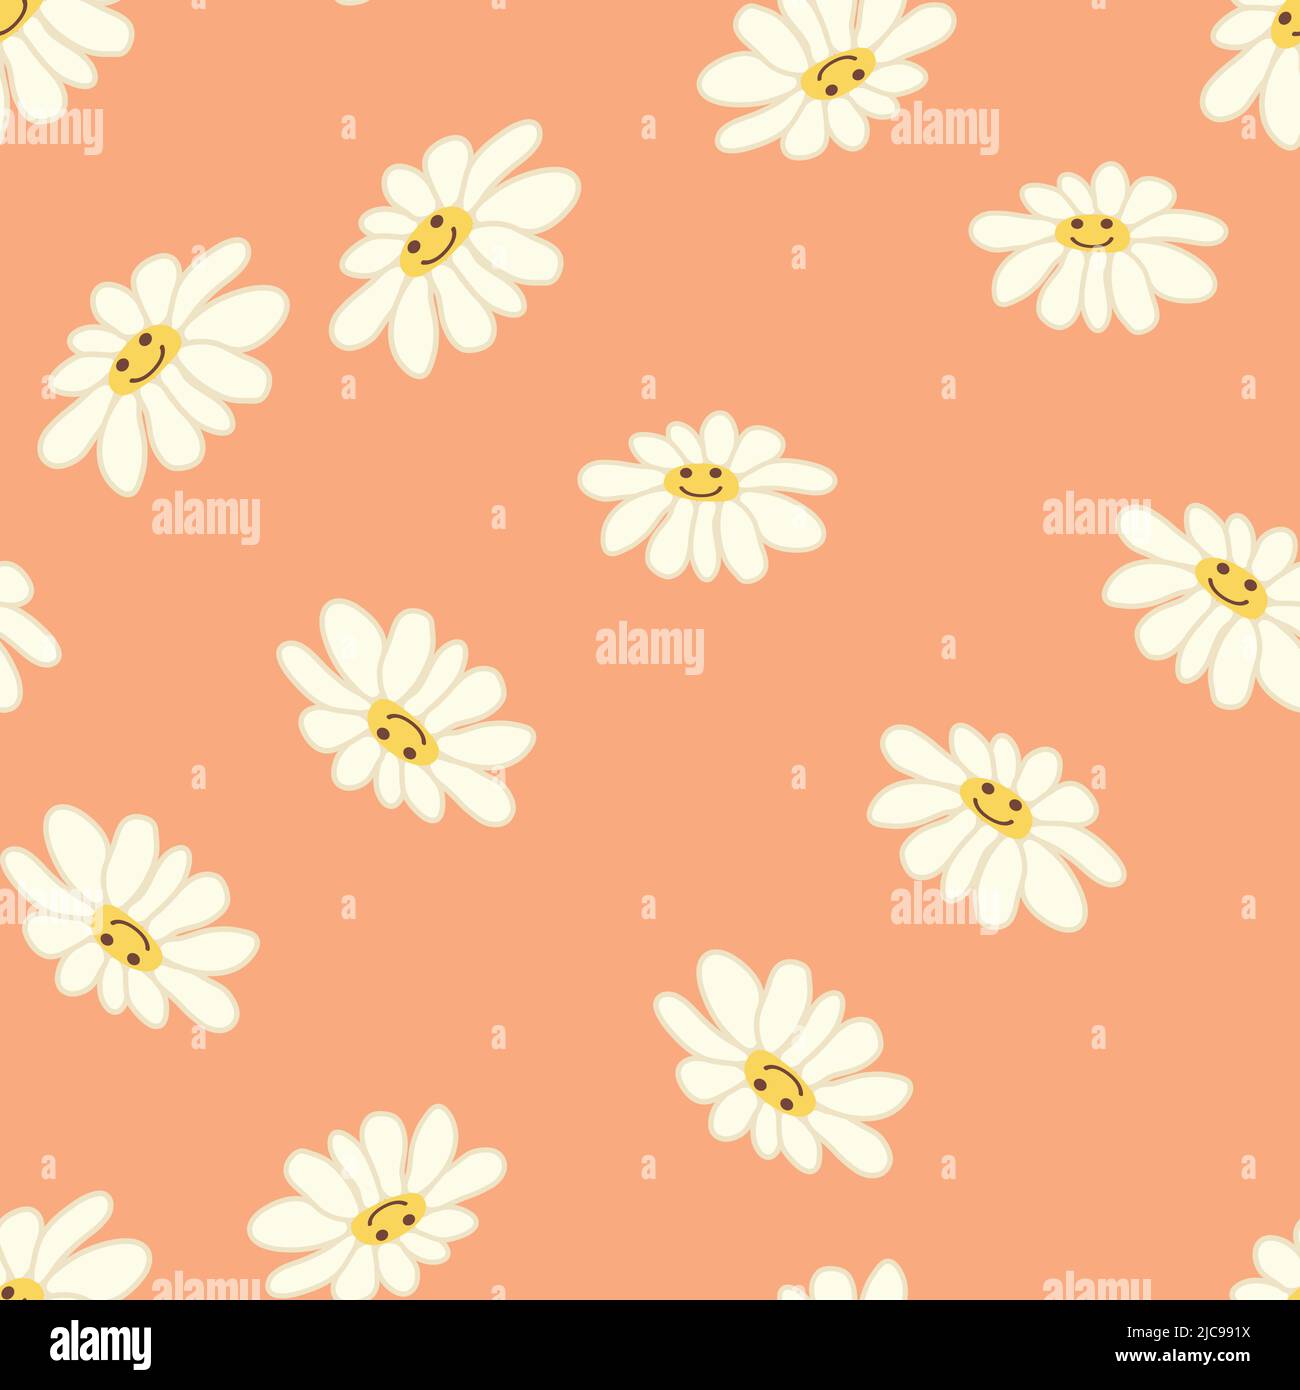 Hippie Aesthetic. 1970s Seamless Pattern Pack In Yellow, Daisy